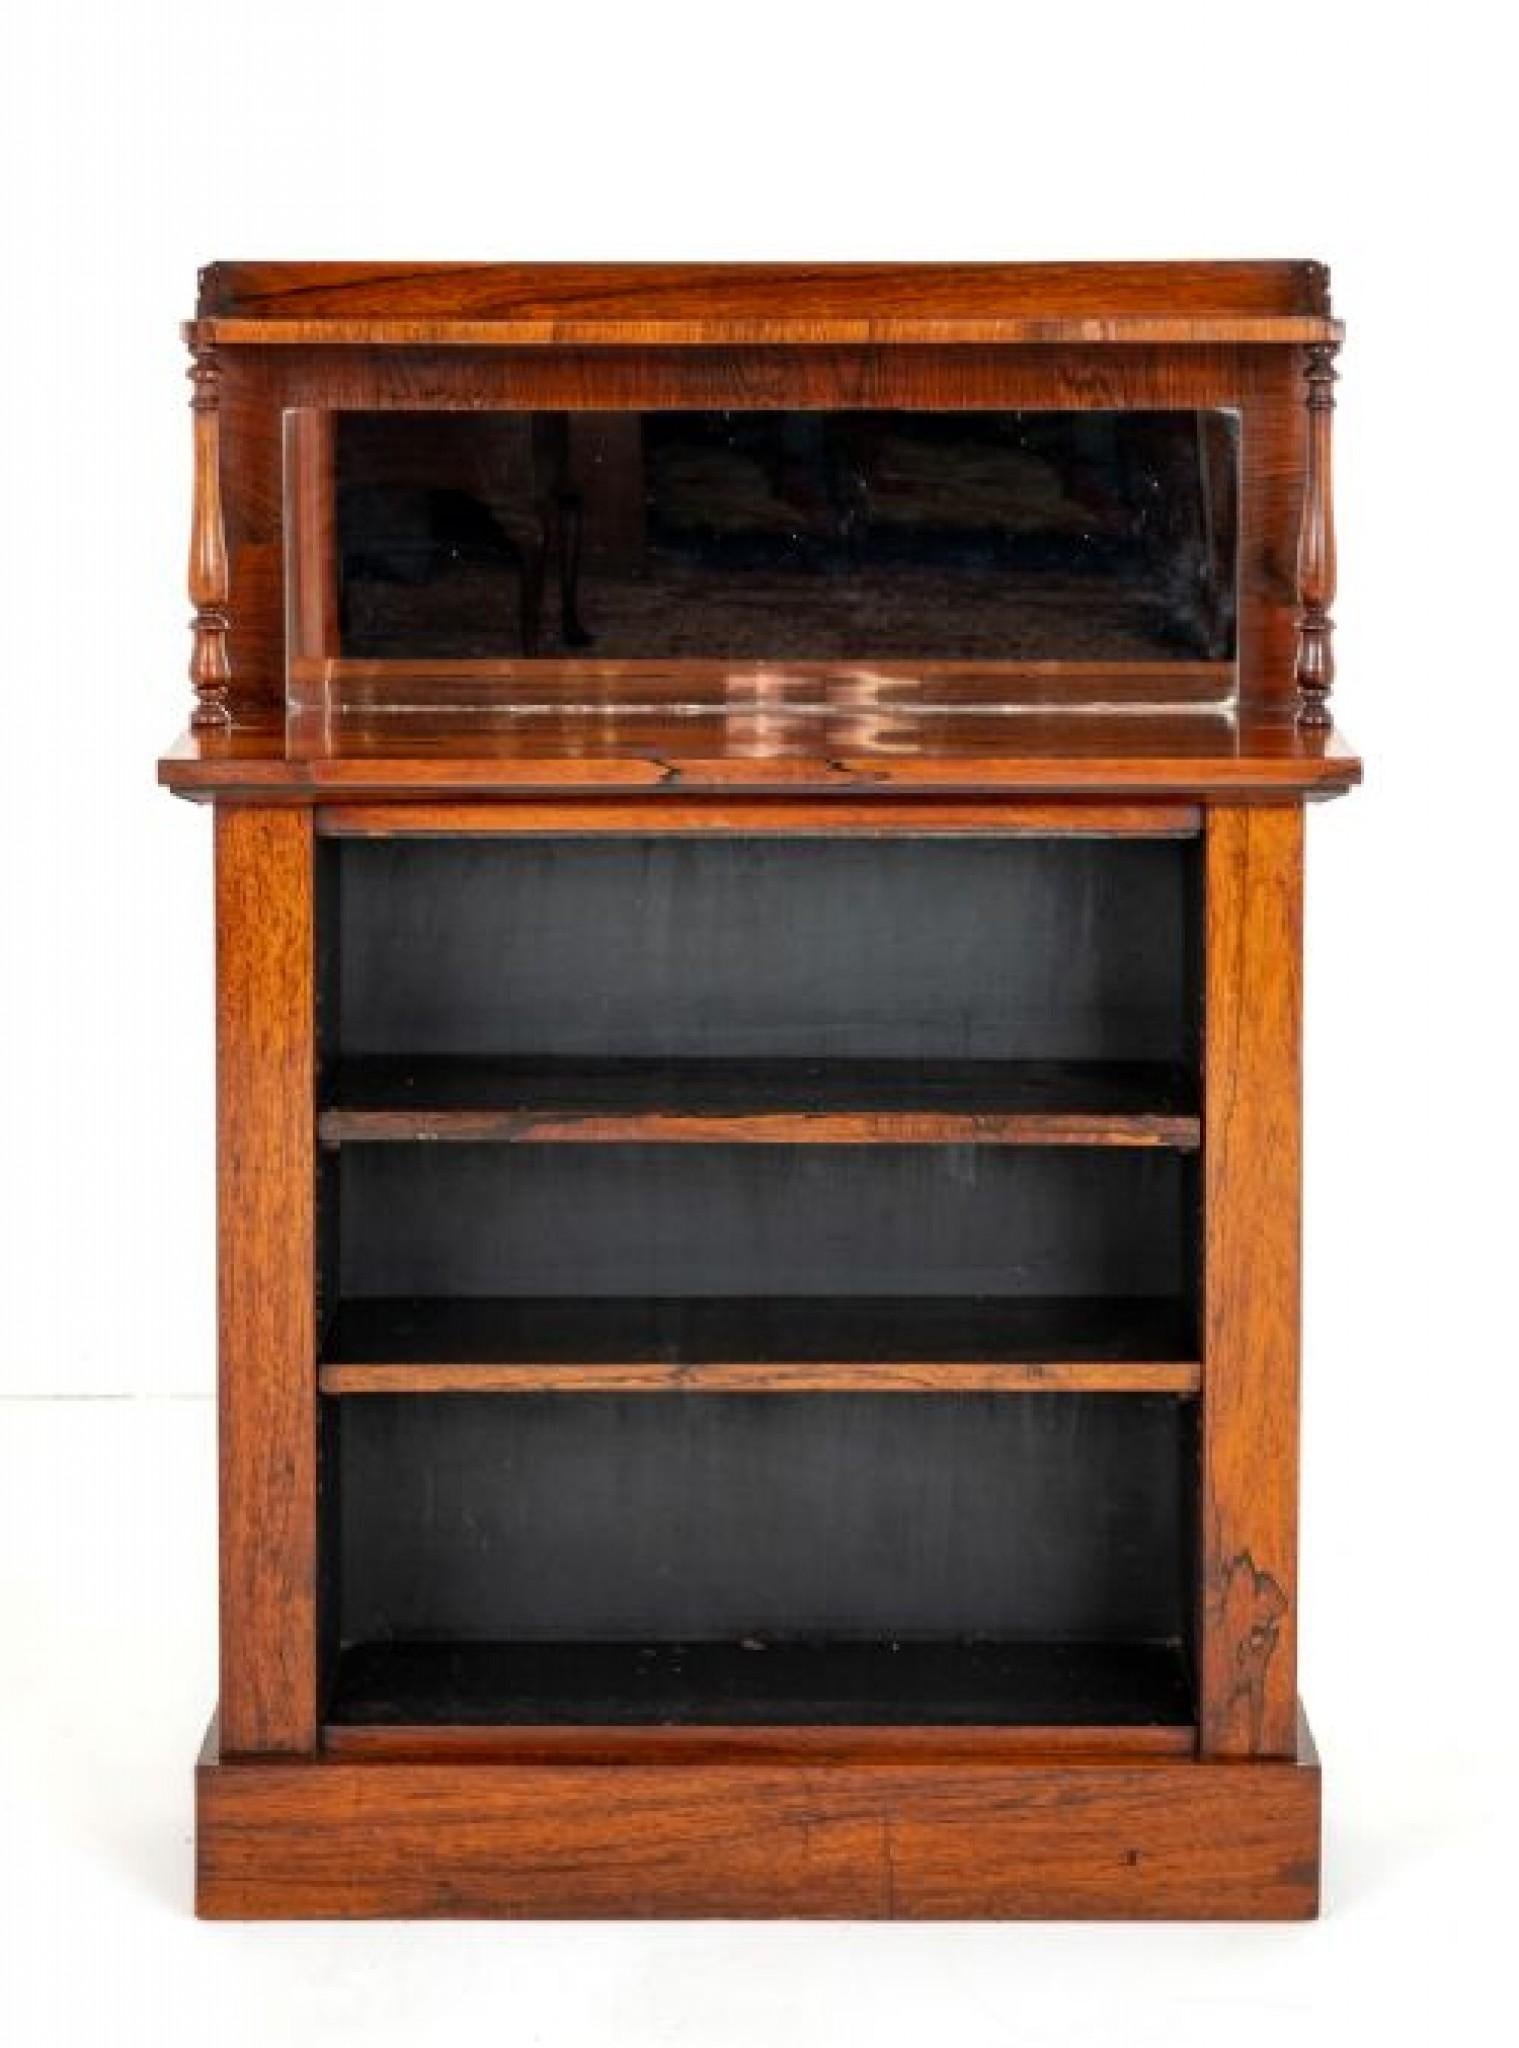 Unusual Early Victorian Open Bookcase.
This Bookcase is Raised Upon a Plinth Base.
Period Victorian
Having 2 Adjustable Shelves.
The Top Section is Supported on Turned Columns with a small Upstand and a Mirrored Back.
Presented in Good Condition.